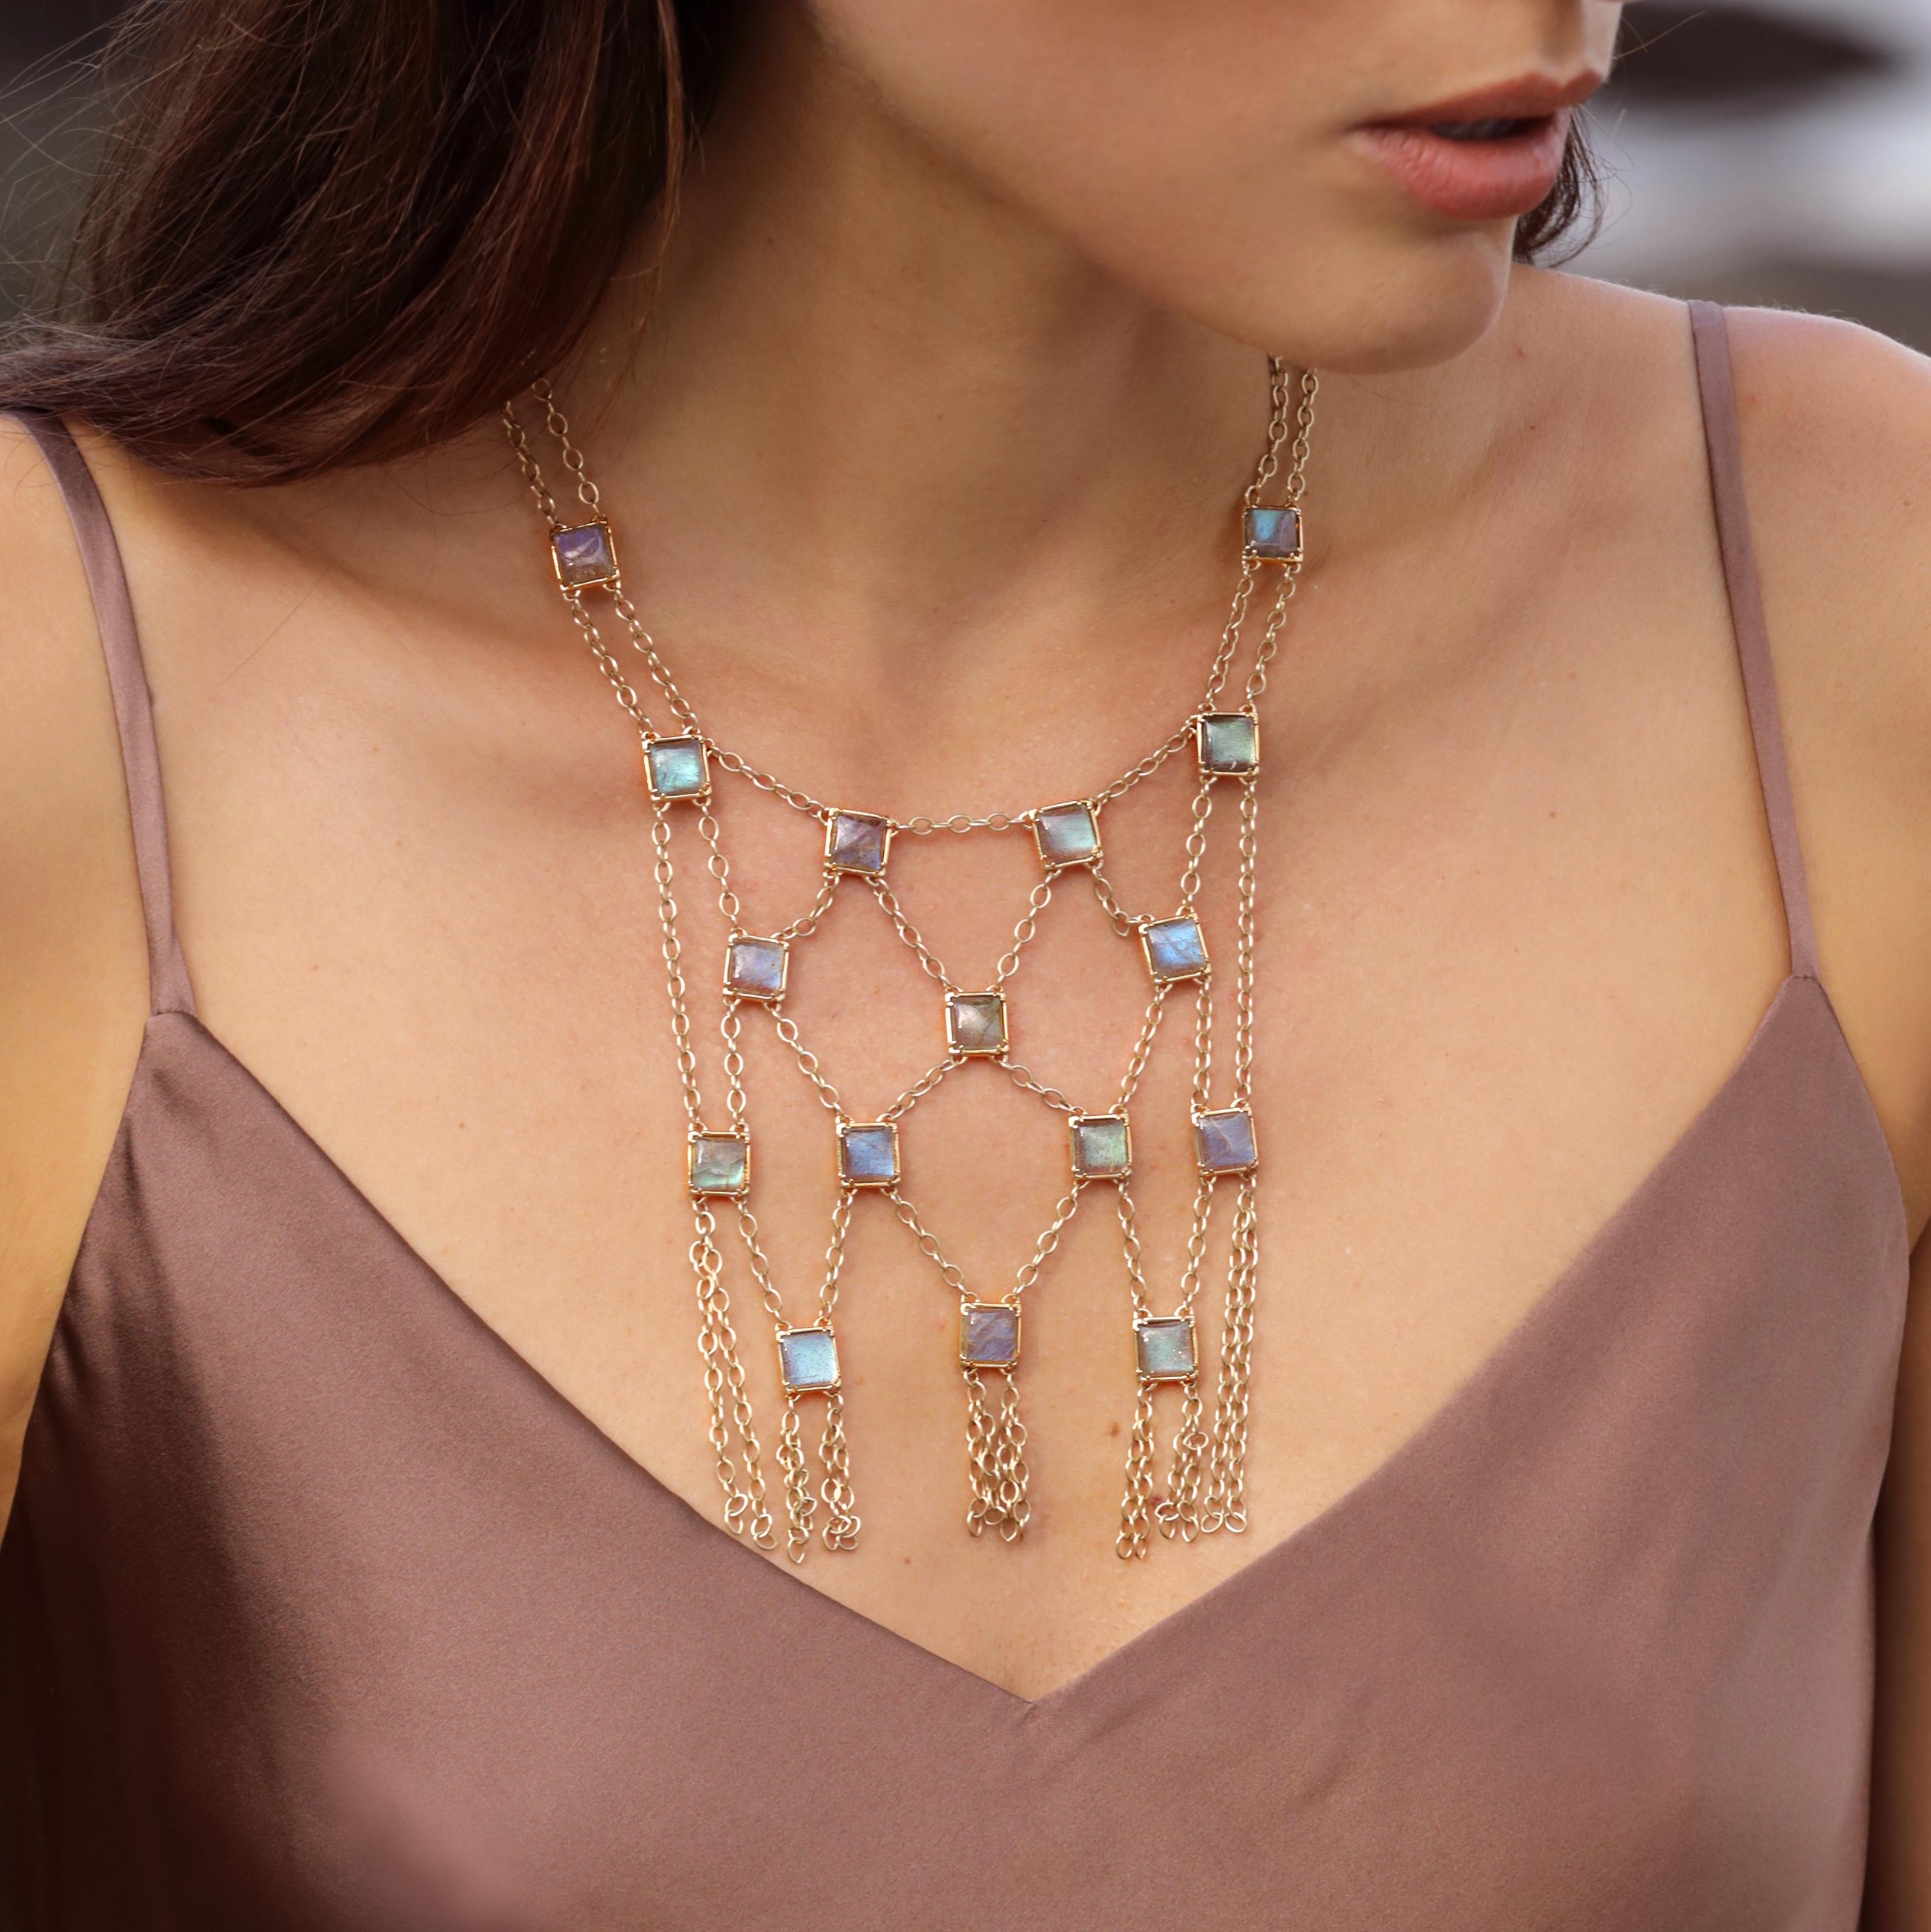 The glowing blue labradorite on open work mesh chain is designed strategically to function casually or as a bold standout.  
Whether on the skin or over a garment, this alluring yellow gold bib necklace is a versatile layer added to a keenly edited